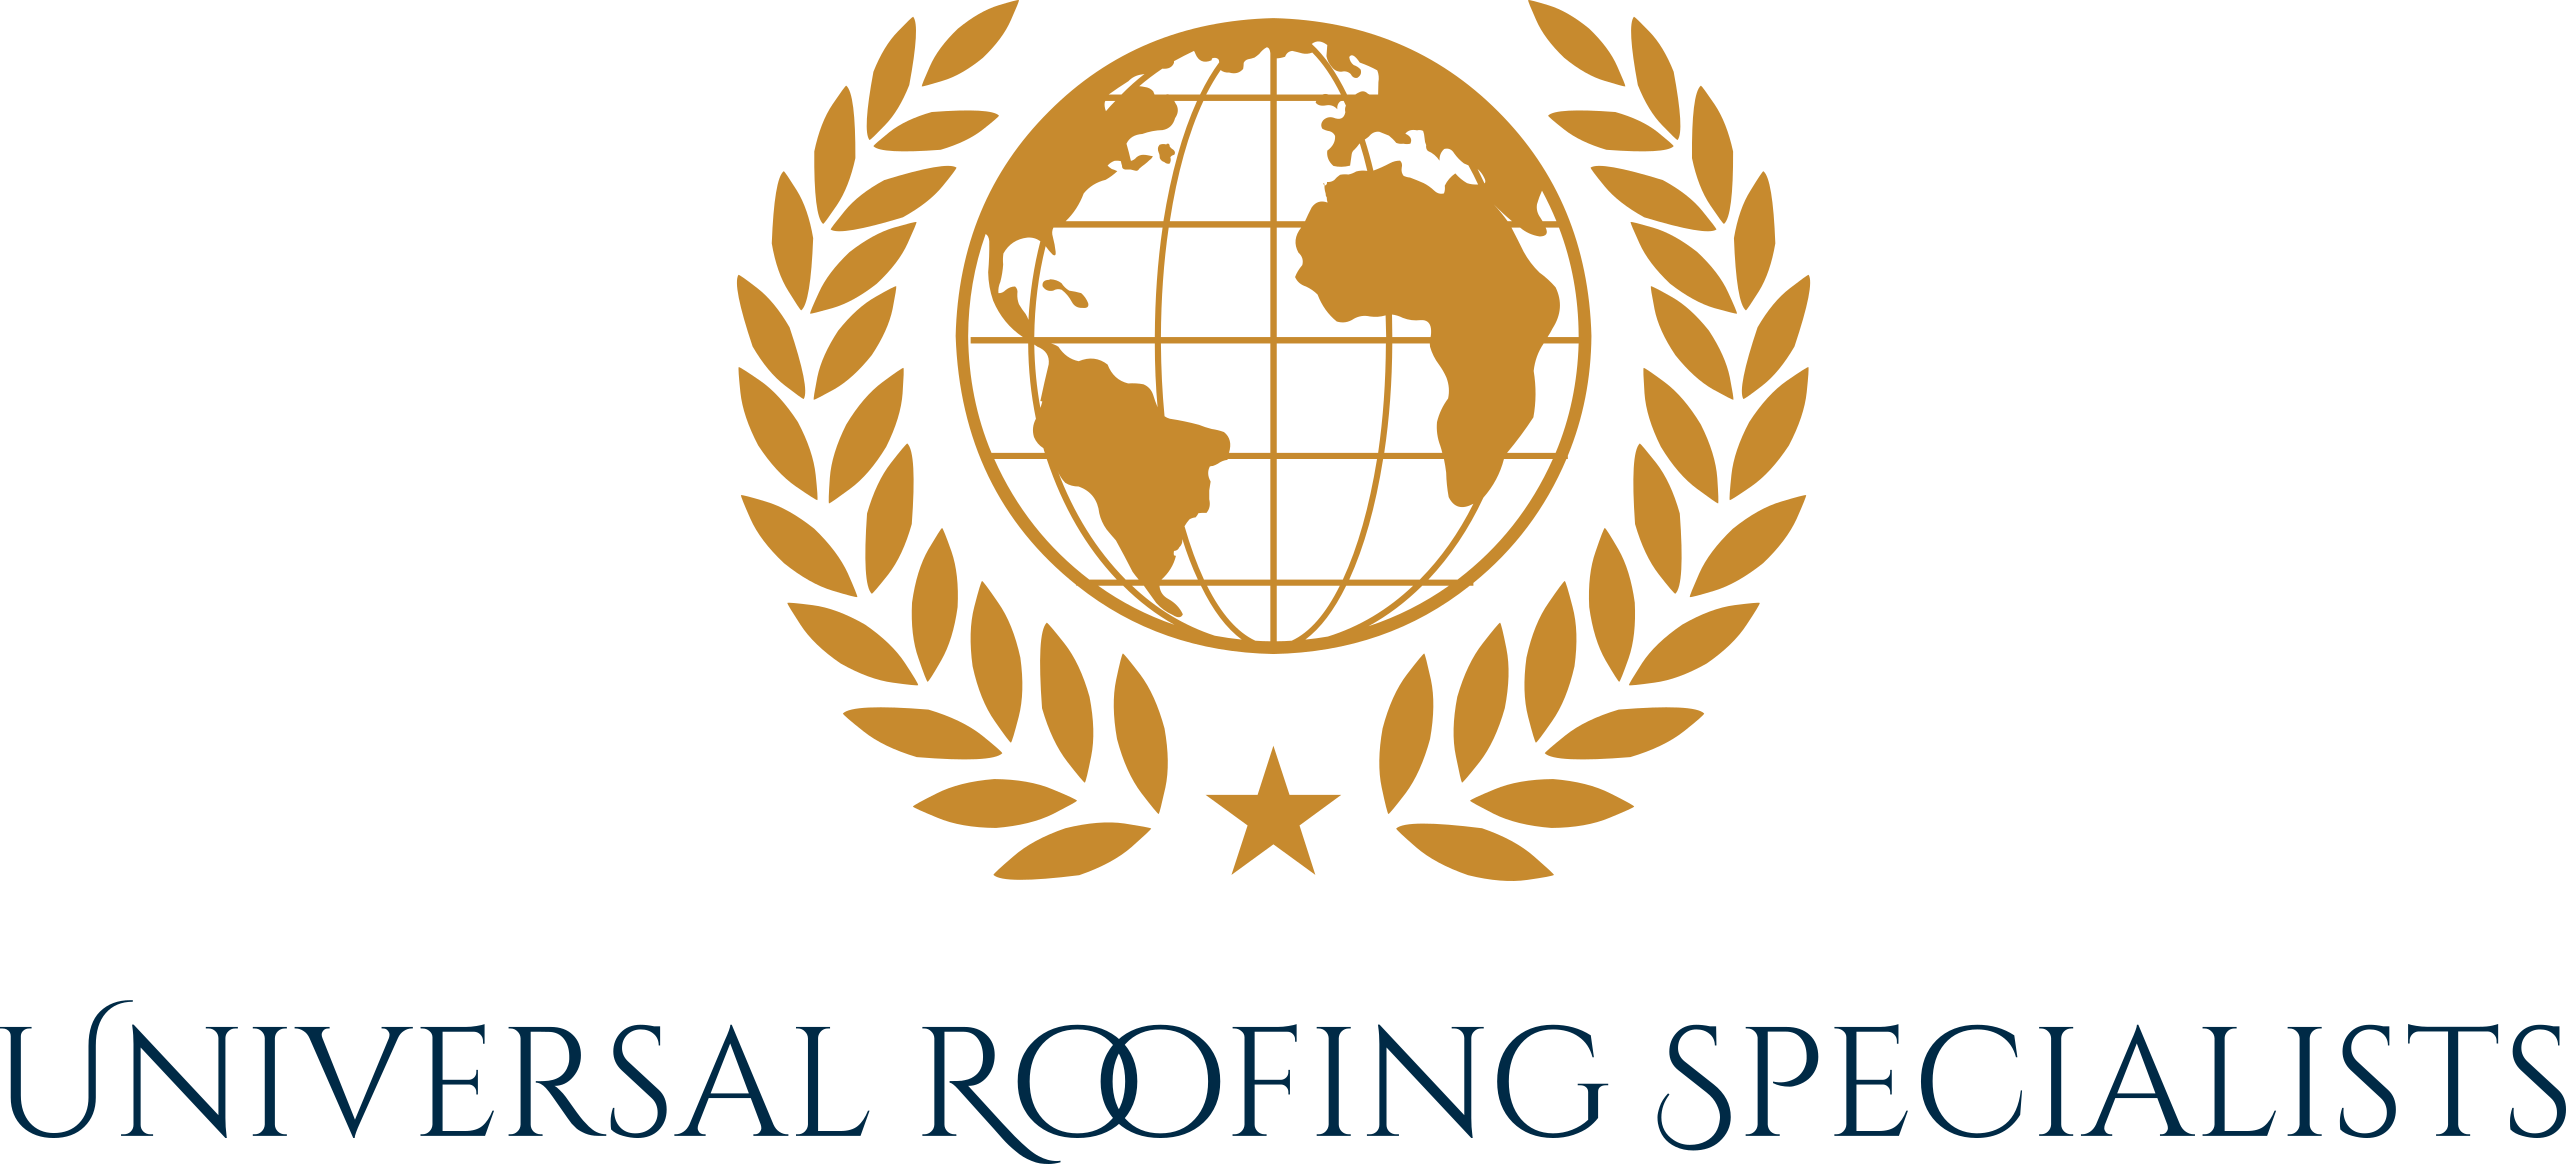 Universal Roofing Specialists Logo